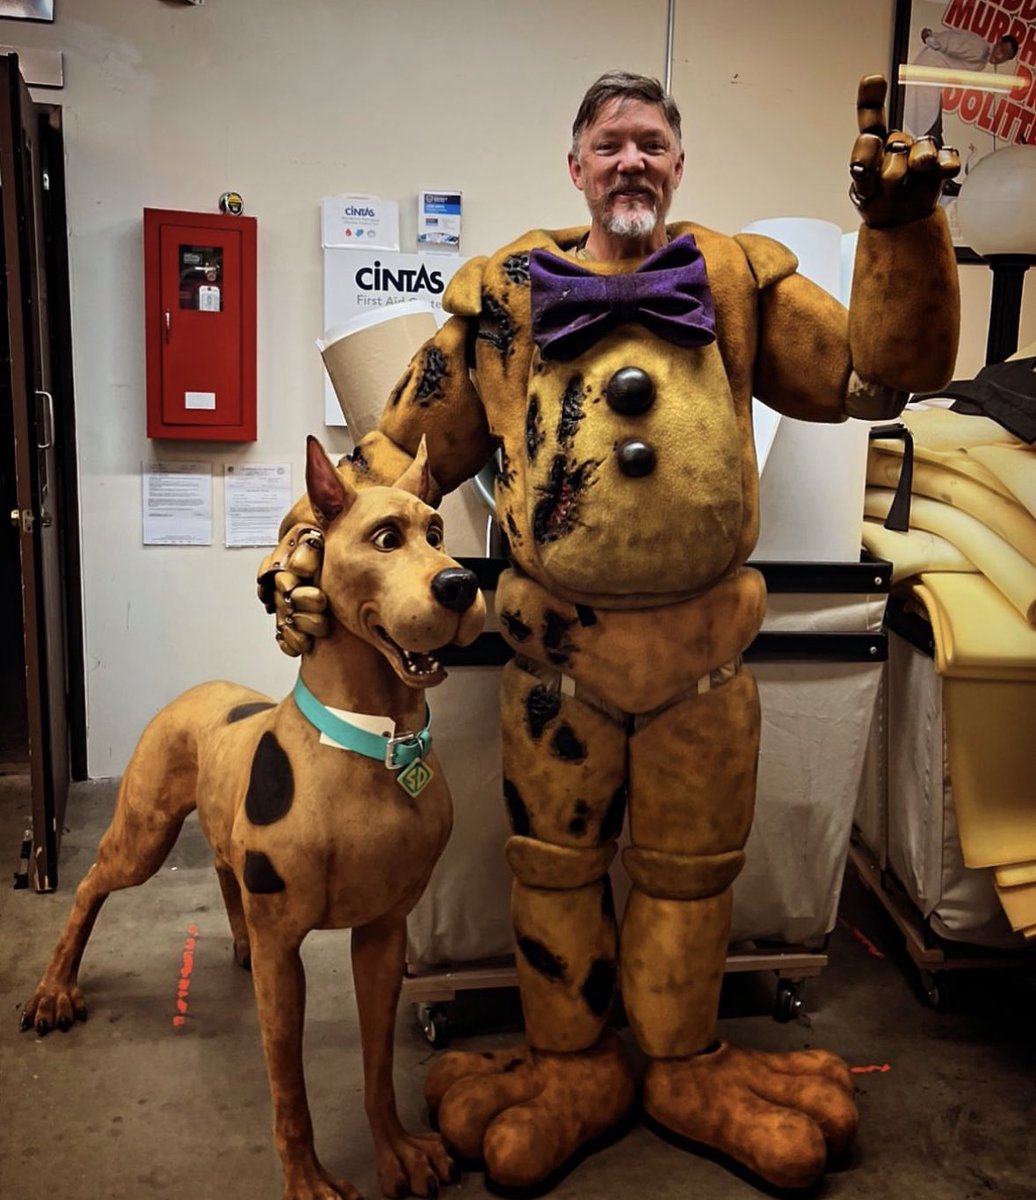 Matthew Lillard in his Springtrap costume with the live-action Scooby Doo puppet.